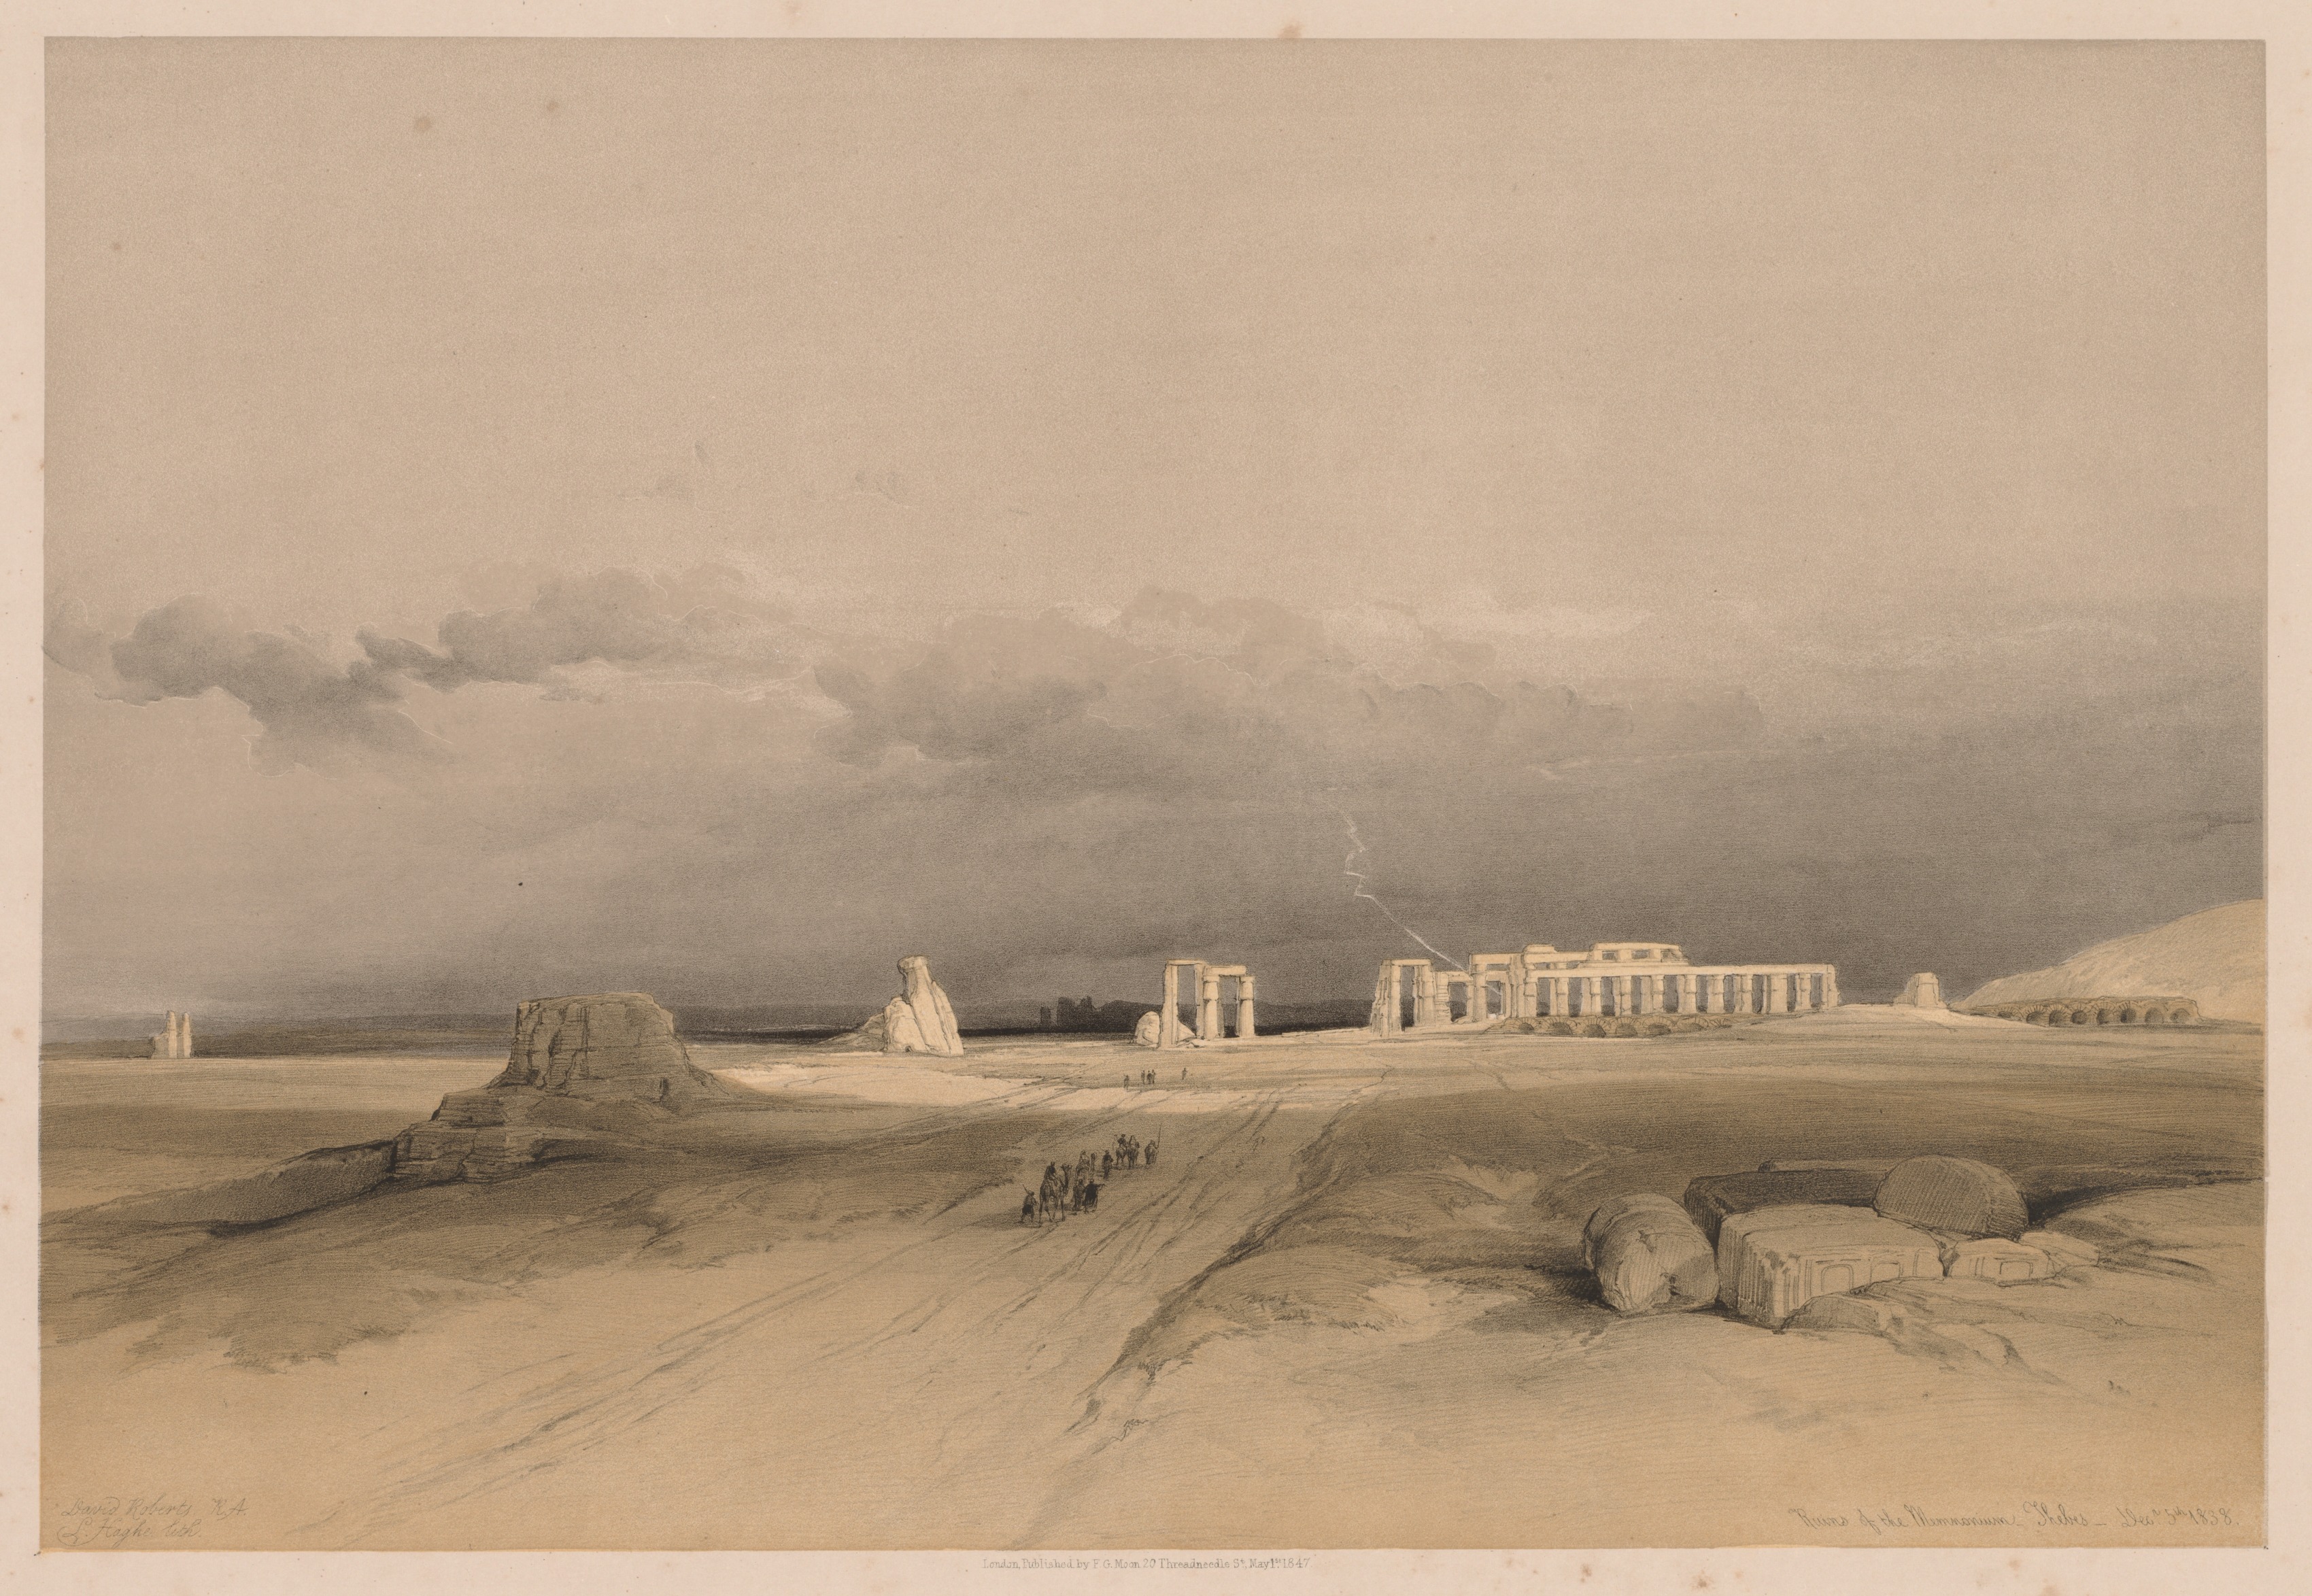 Egypt and Nubia:  Volume II - No. 8, Ruins of the Memnonium, Thebes